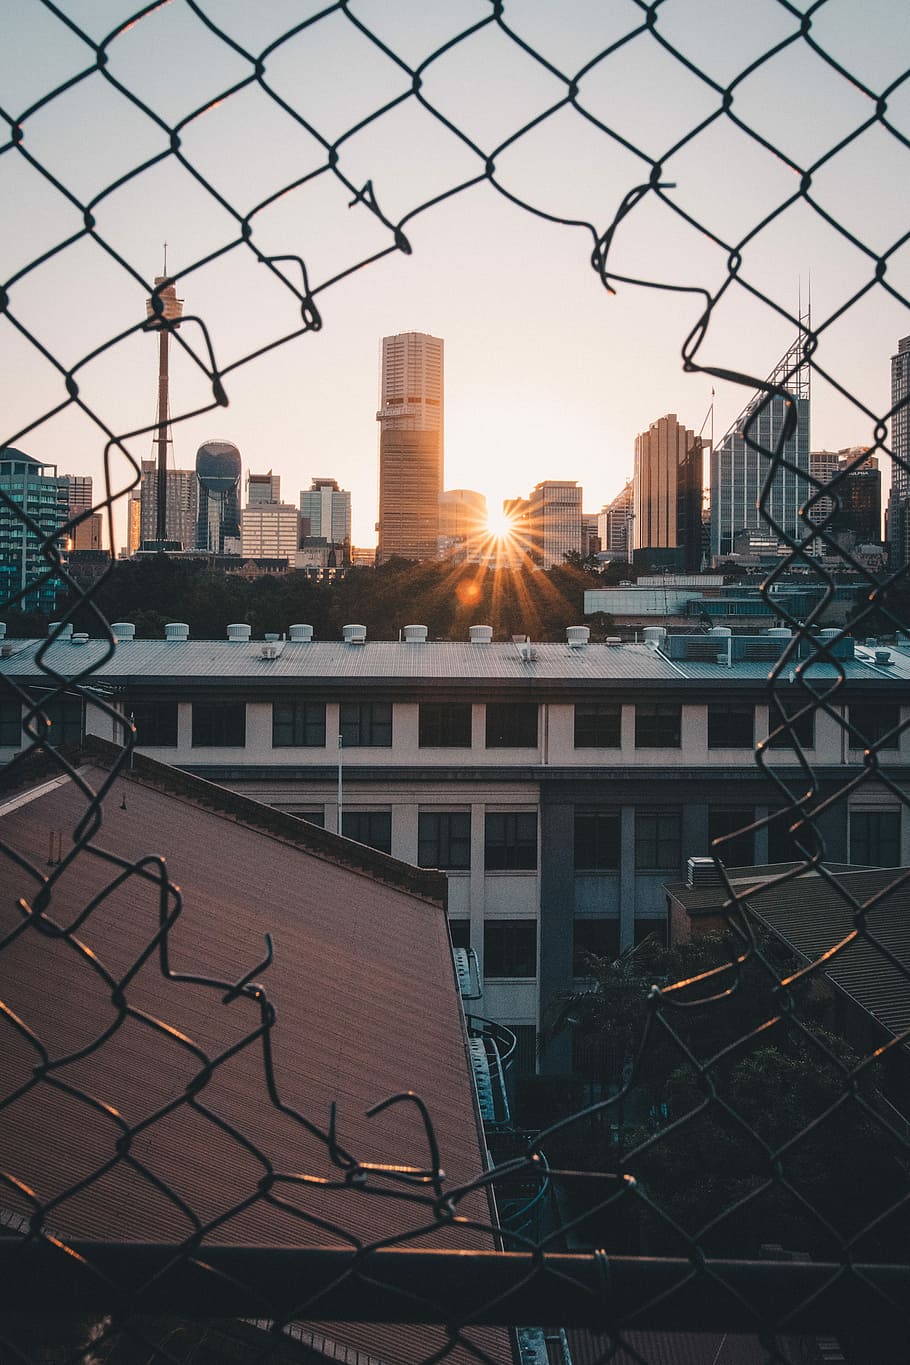 viewing sunset through cyclone fence, gray metal chain-link fence with high-rise building view during sunset